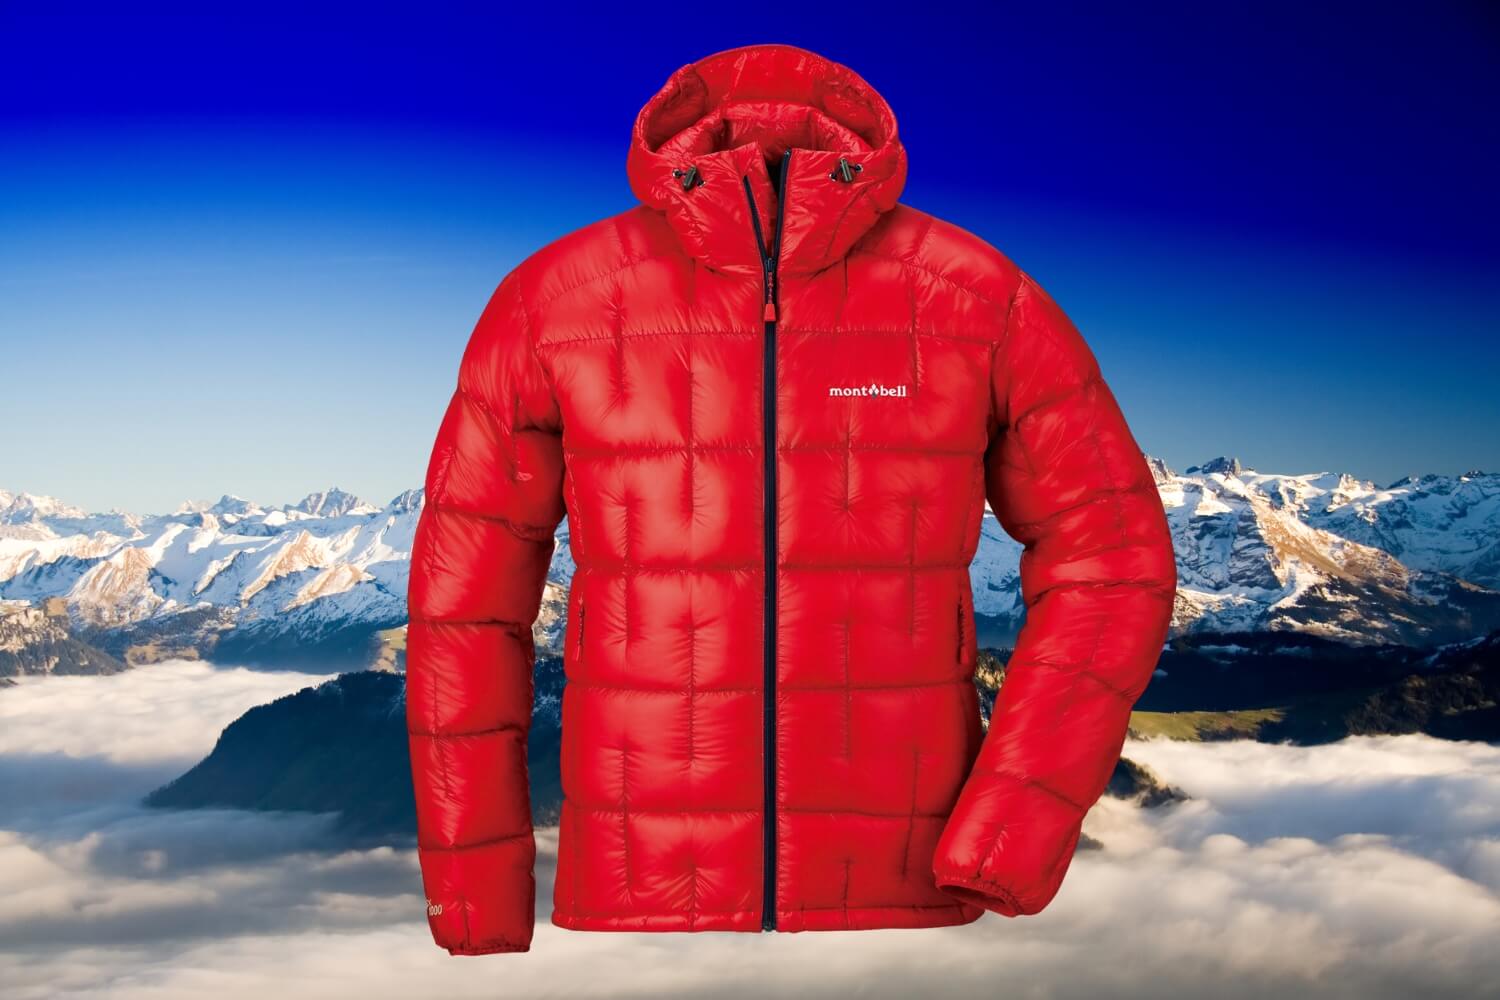 BEST FOR DOWN JACKET FOR THRU-HIKING: MONTBELL PLASMA 1000